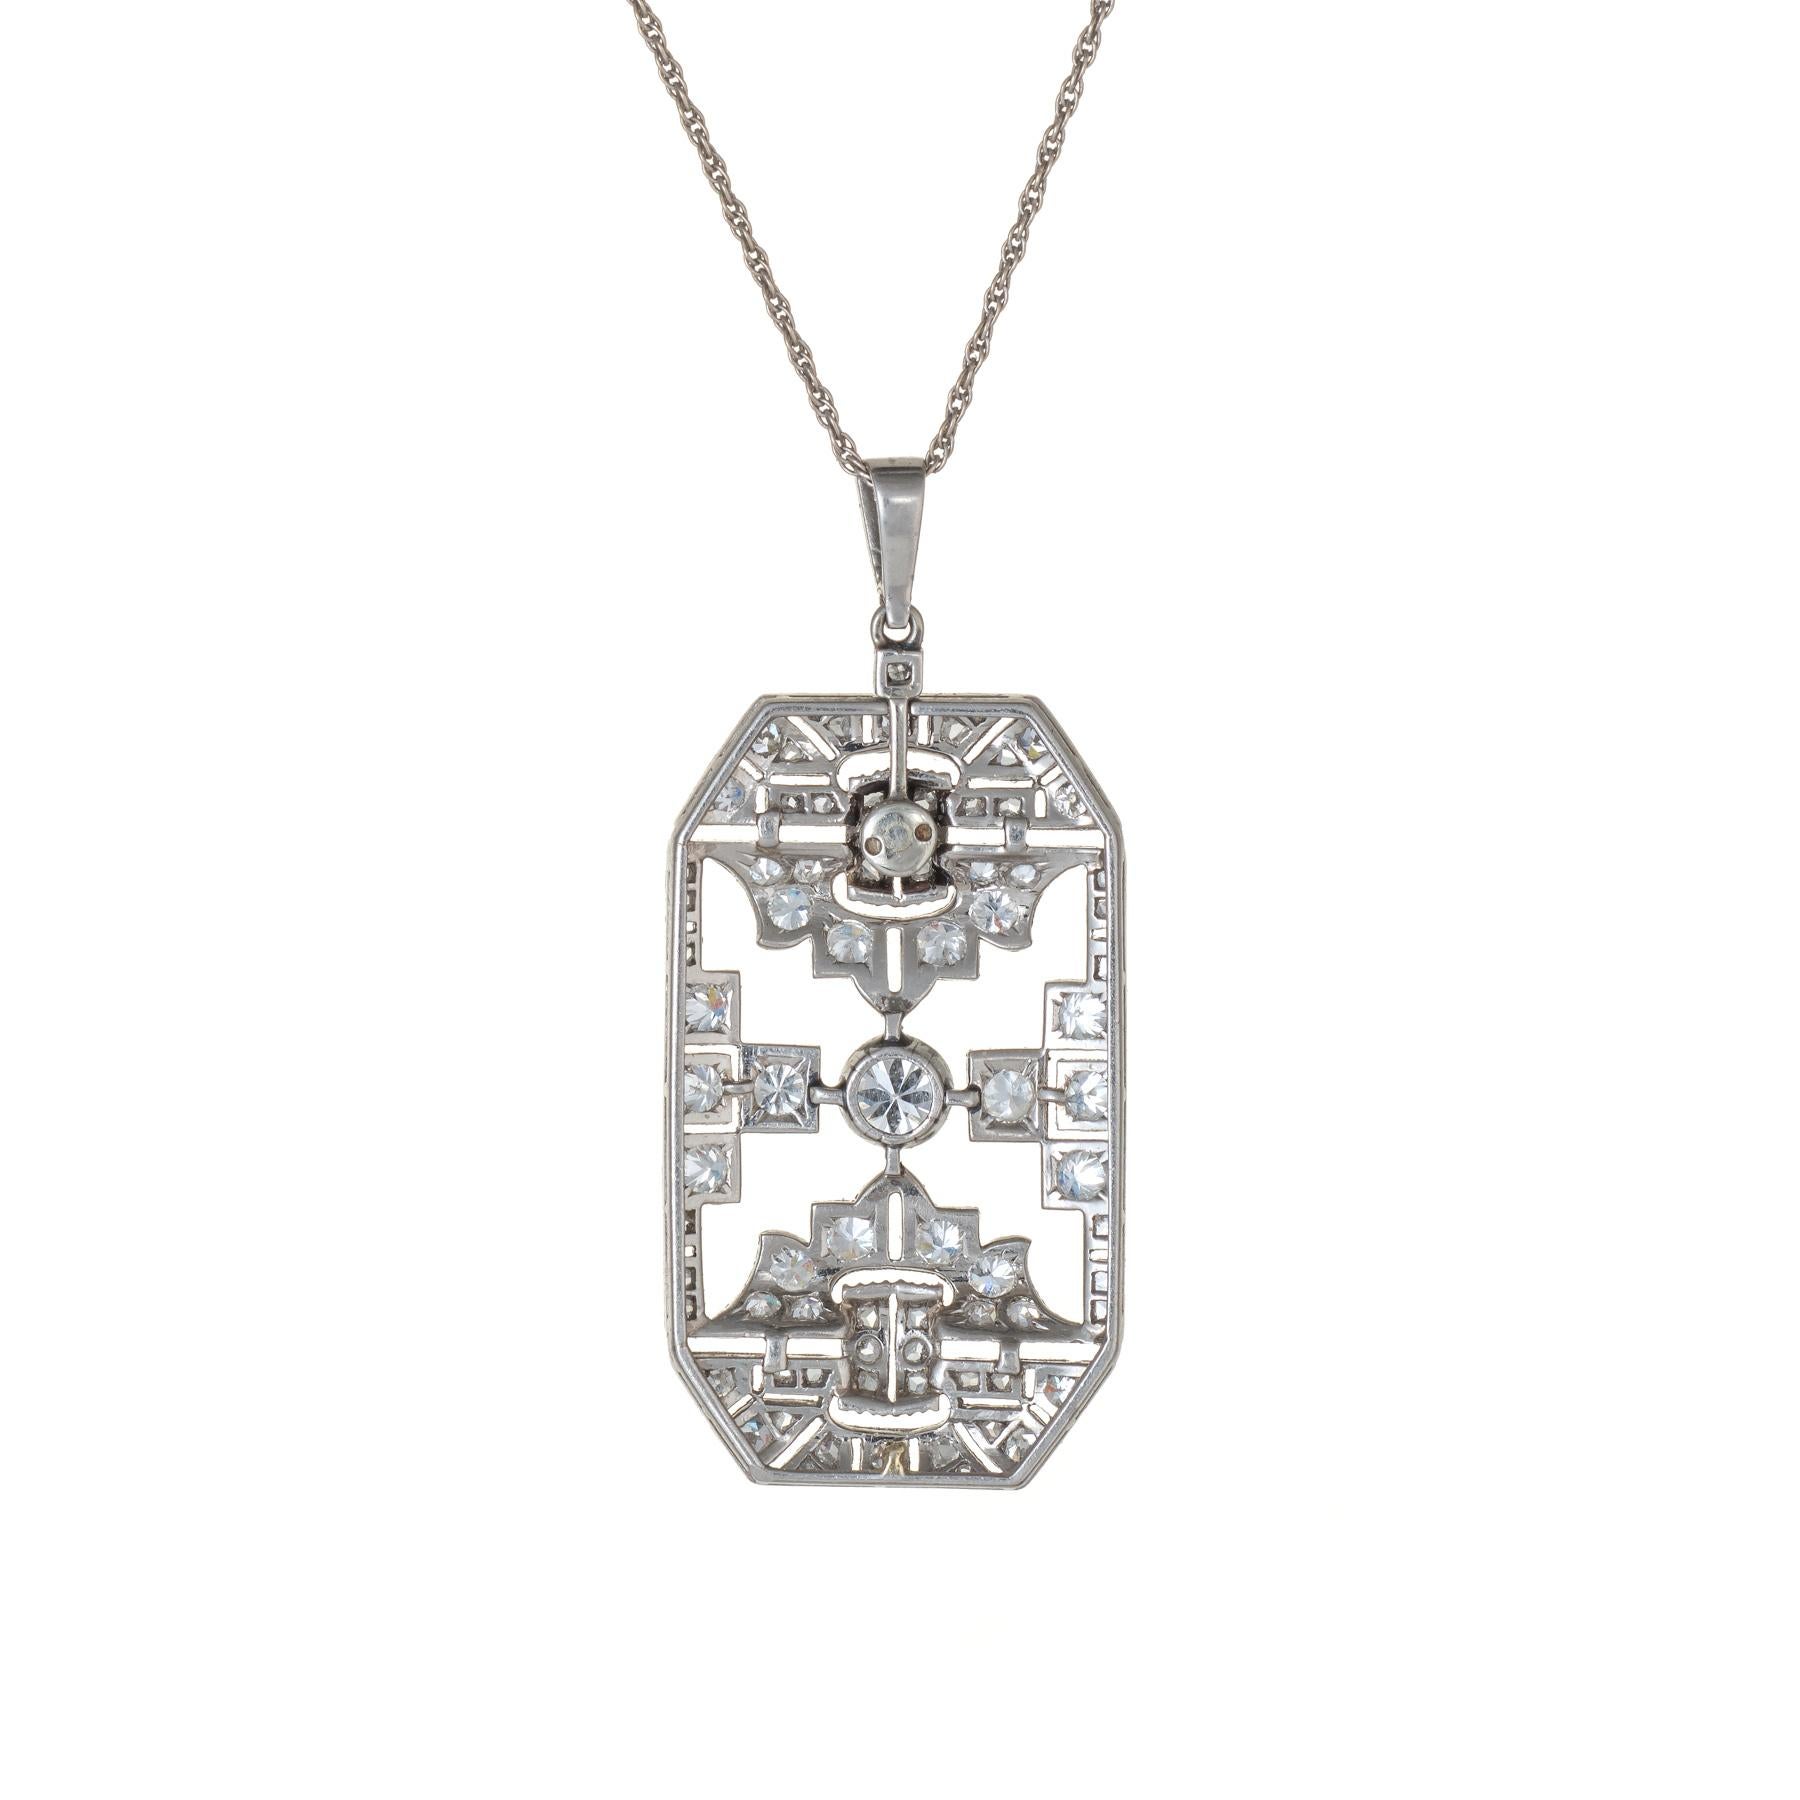 Finely detailed vintage Art Deco era pendant (circa 1920s to 1930s), crafted in 900 platinum.  
Old European, rose and single cut diamonds total an estimated 1 carat (estimated at I-J color and VS2-SI2 clarity).
Geometric detail overlaid with fine